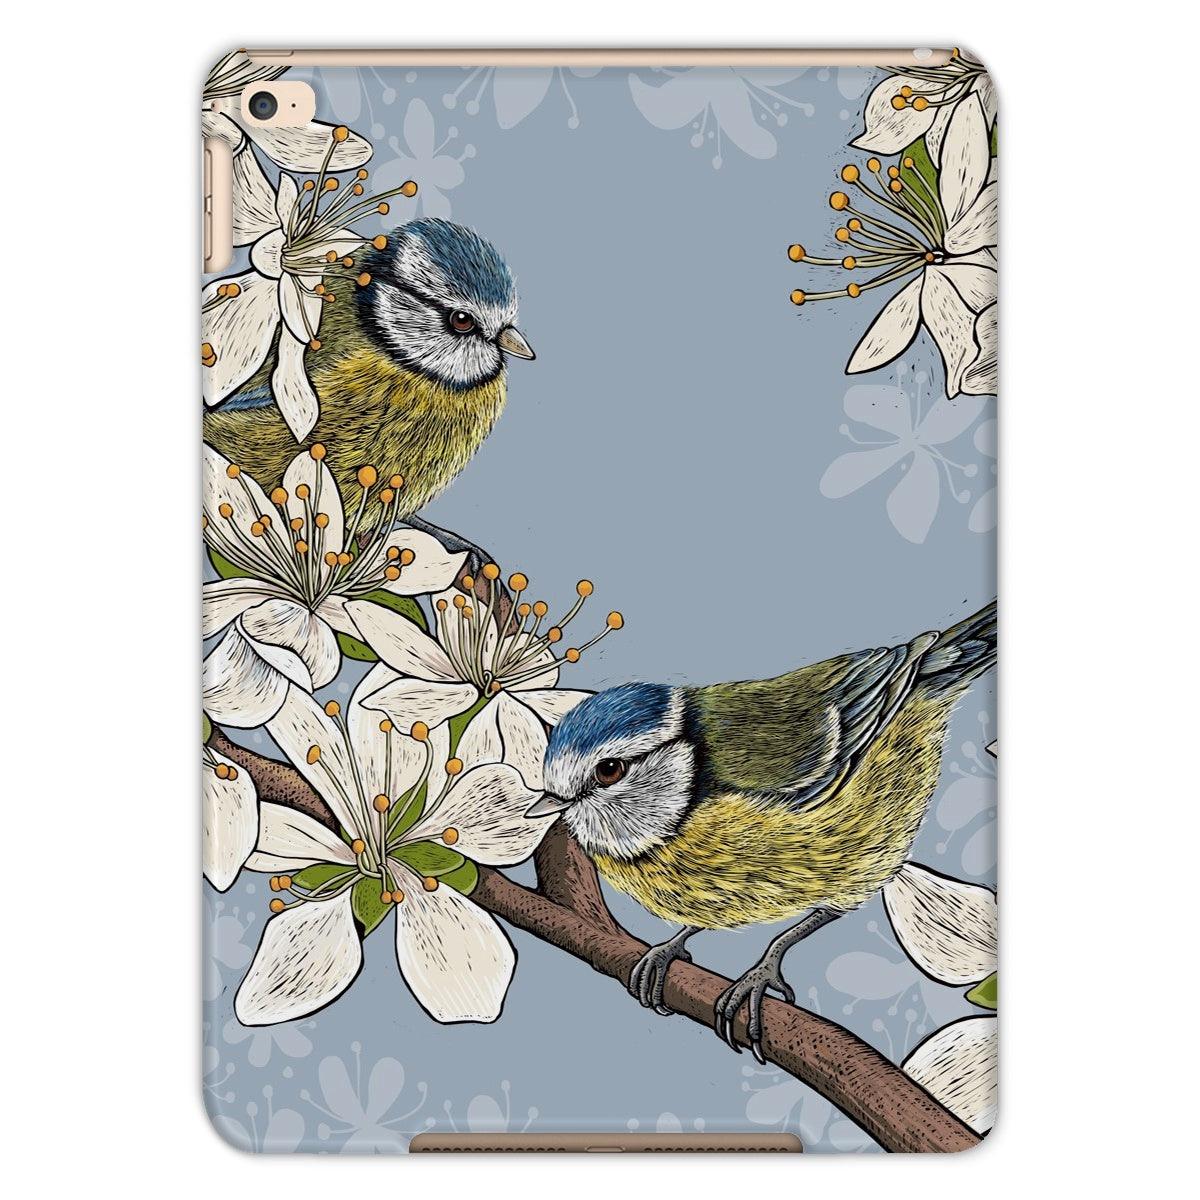 Hedgerow Blue Tits tablet case, designed by Fox and Boo